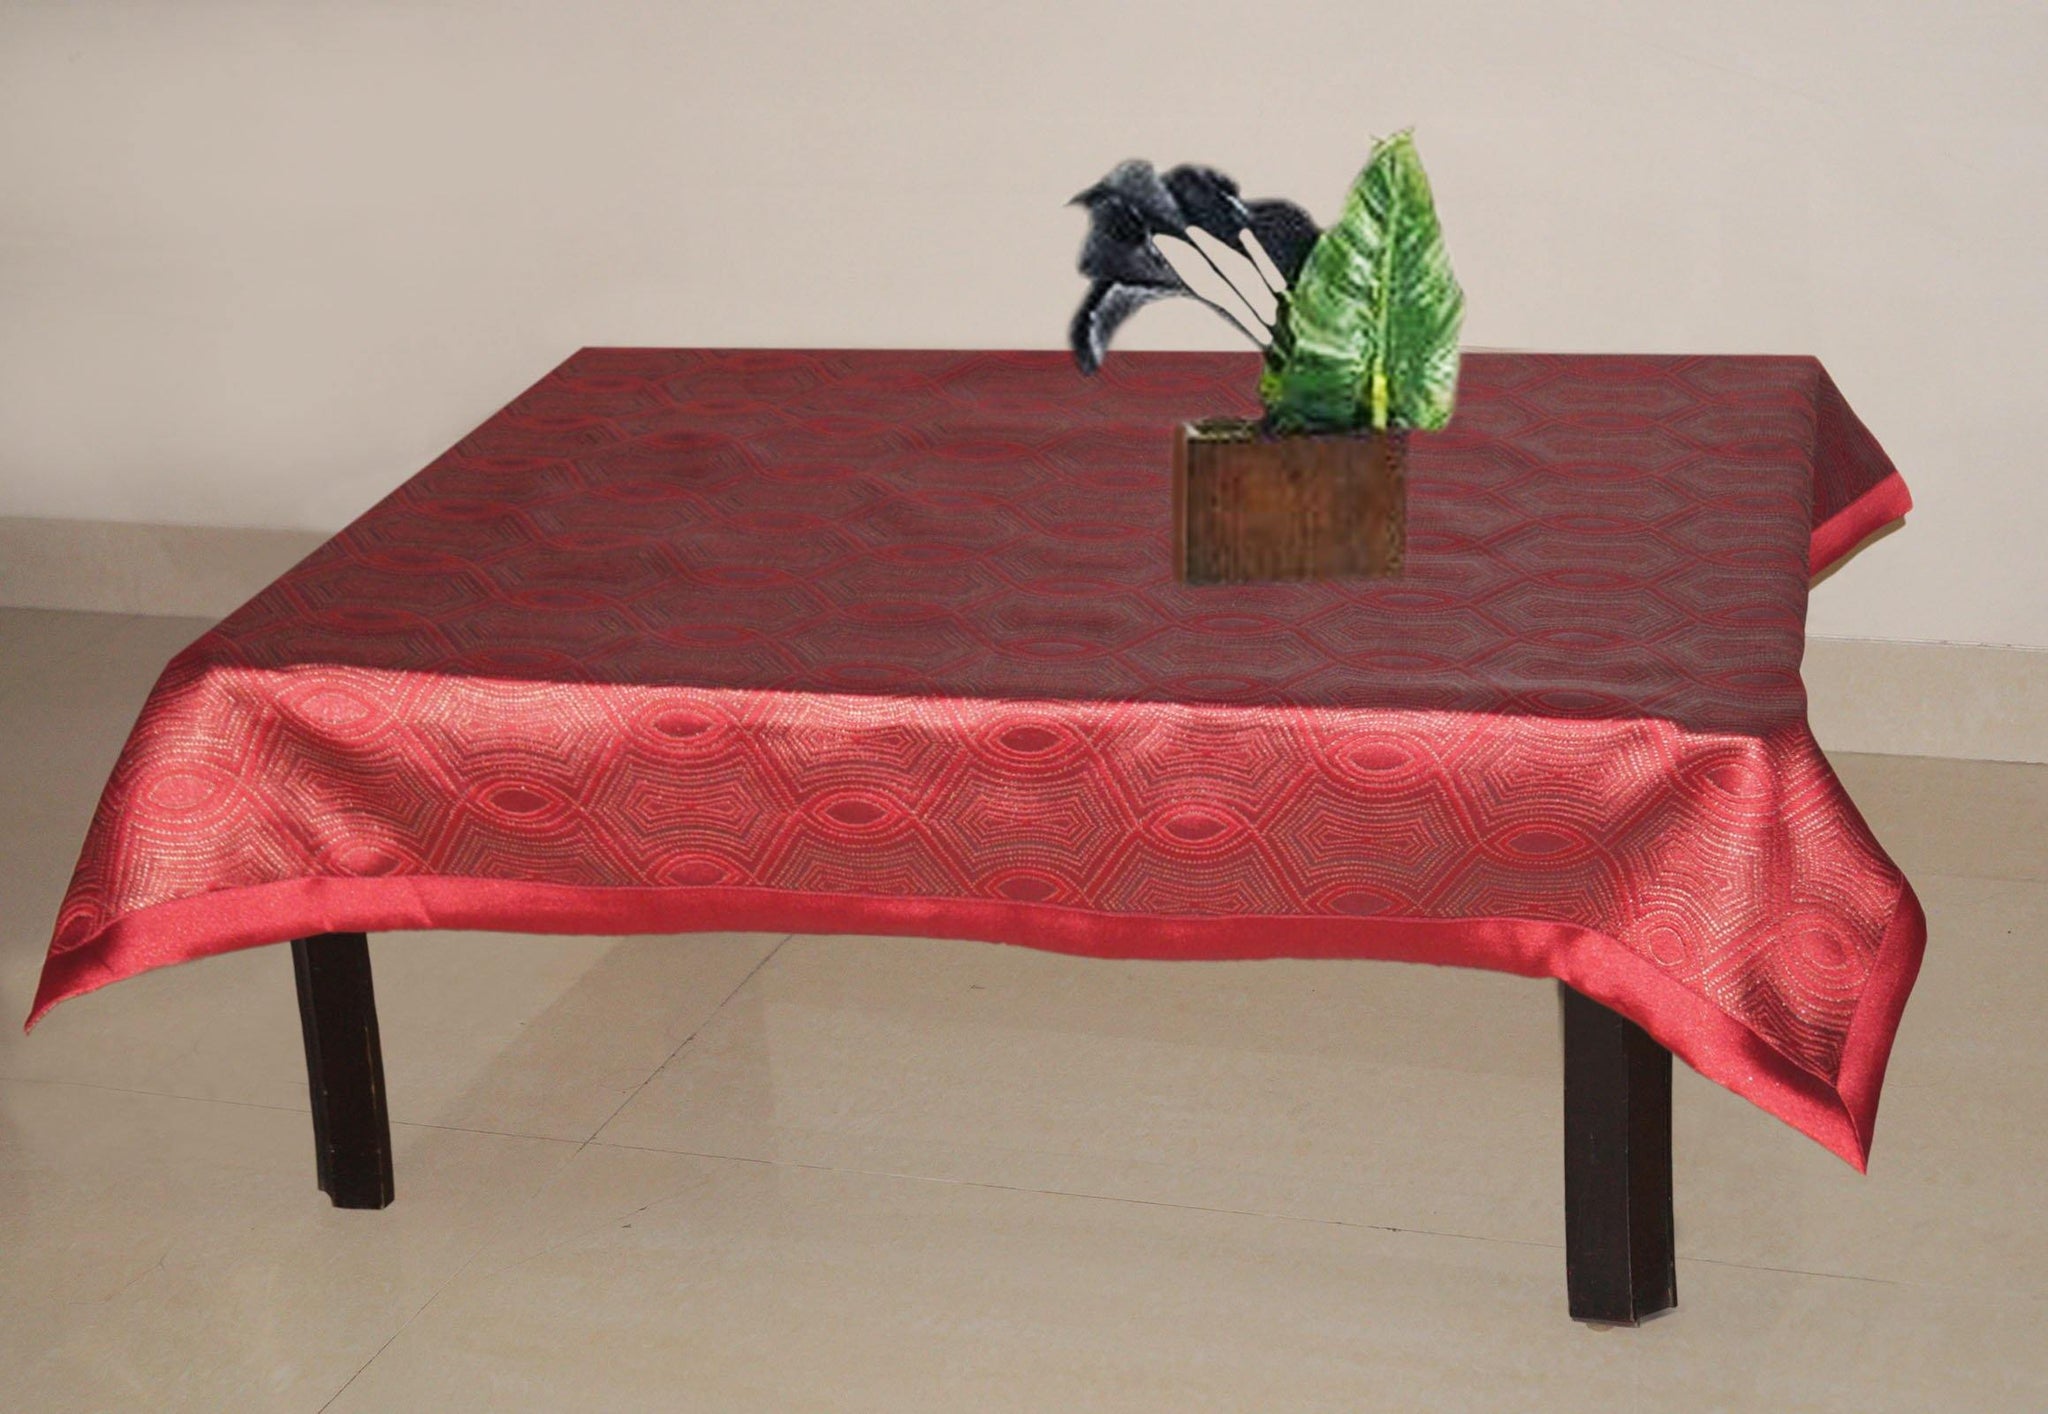 Lushomes Red 1 Selfdesign Jaquard Centre Table Cloth (Size: 36x60 inches), single pc - Lushomes